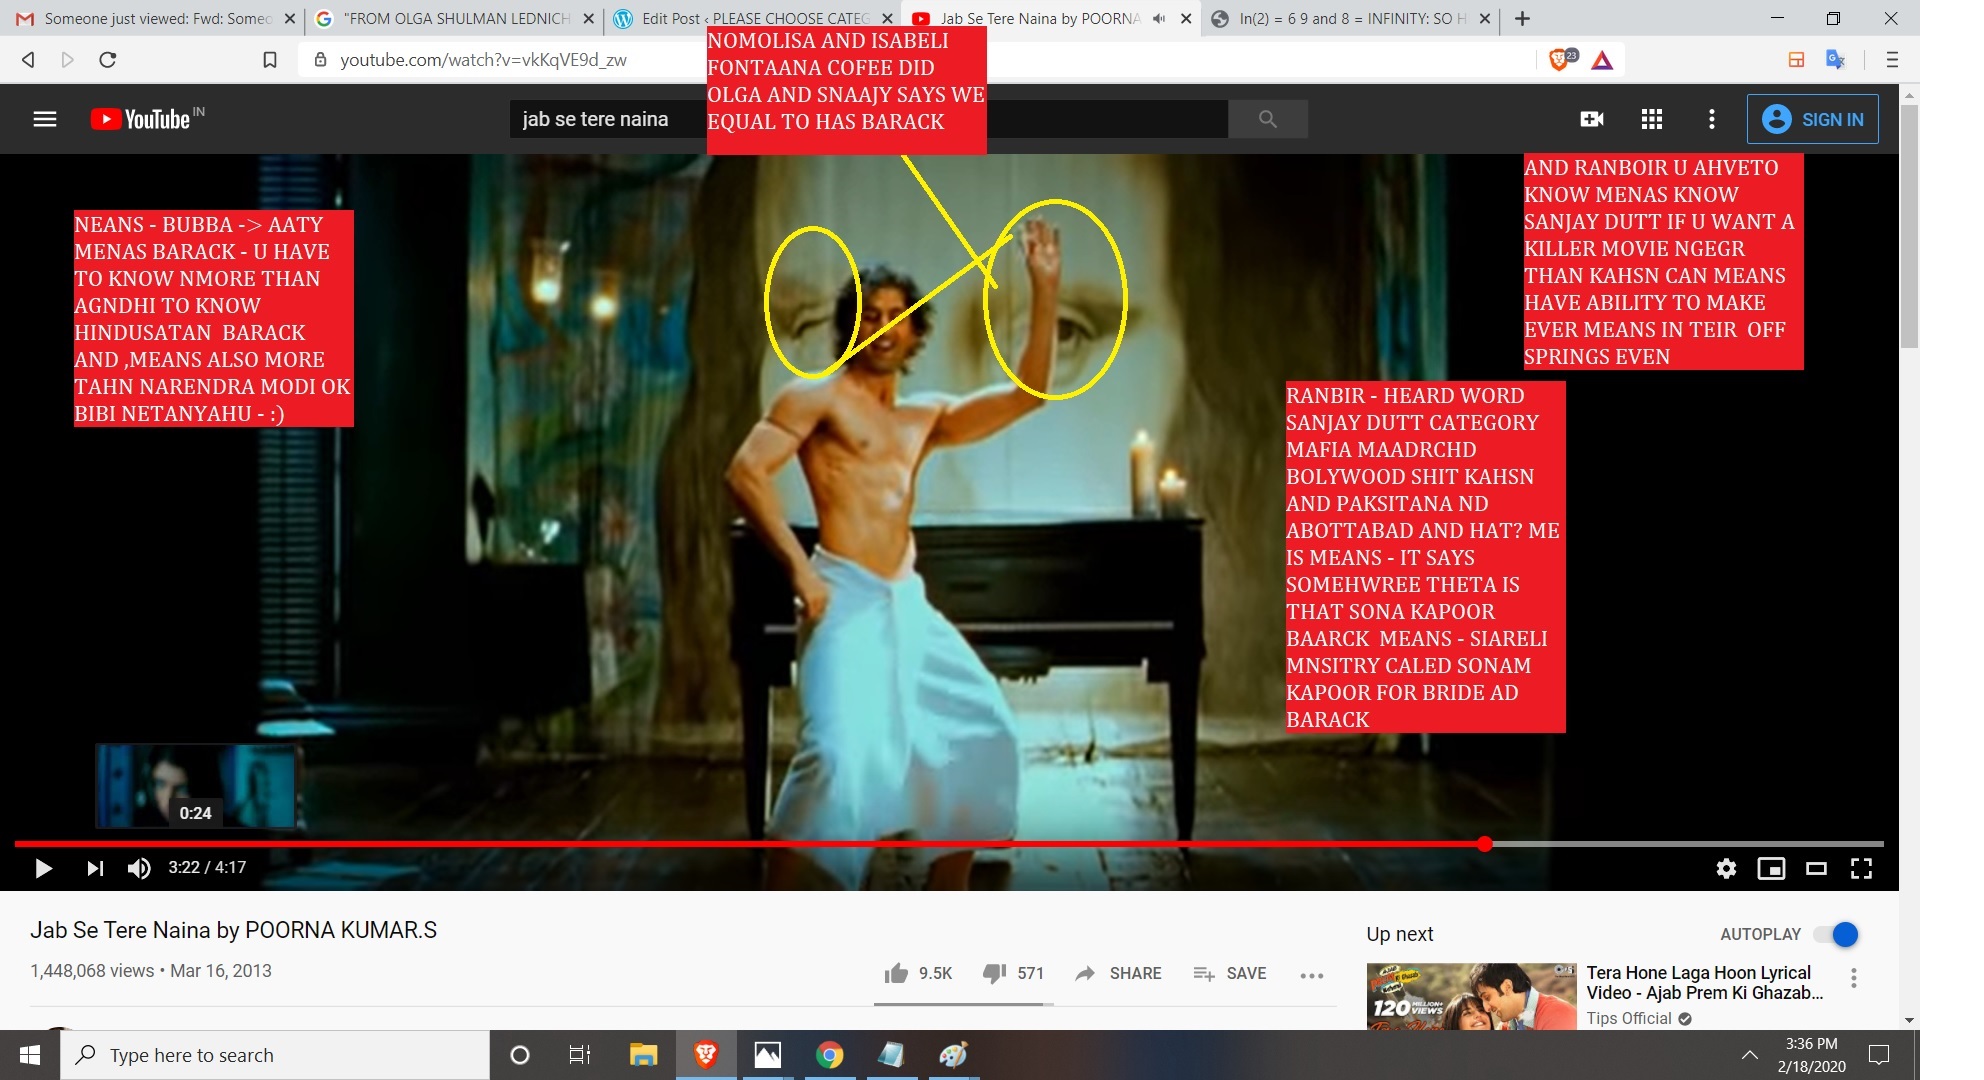 NOMOLISA AND MONALISA DIAGRAMS SEEN MOTHERFUKERS AND WHAT DO U THINKS OLGA AND SANJAY DUTT AND SONAM KAPOOR AND ANIL KAPOOR AND MODI AND SNAJAY DUTT